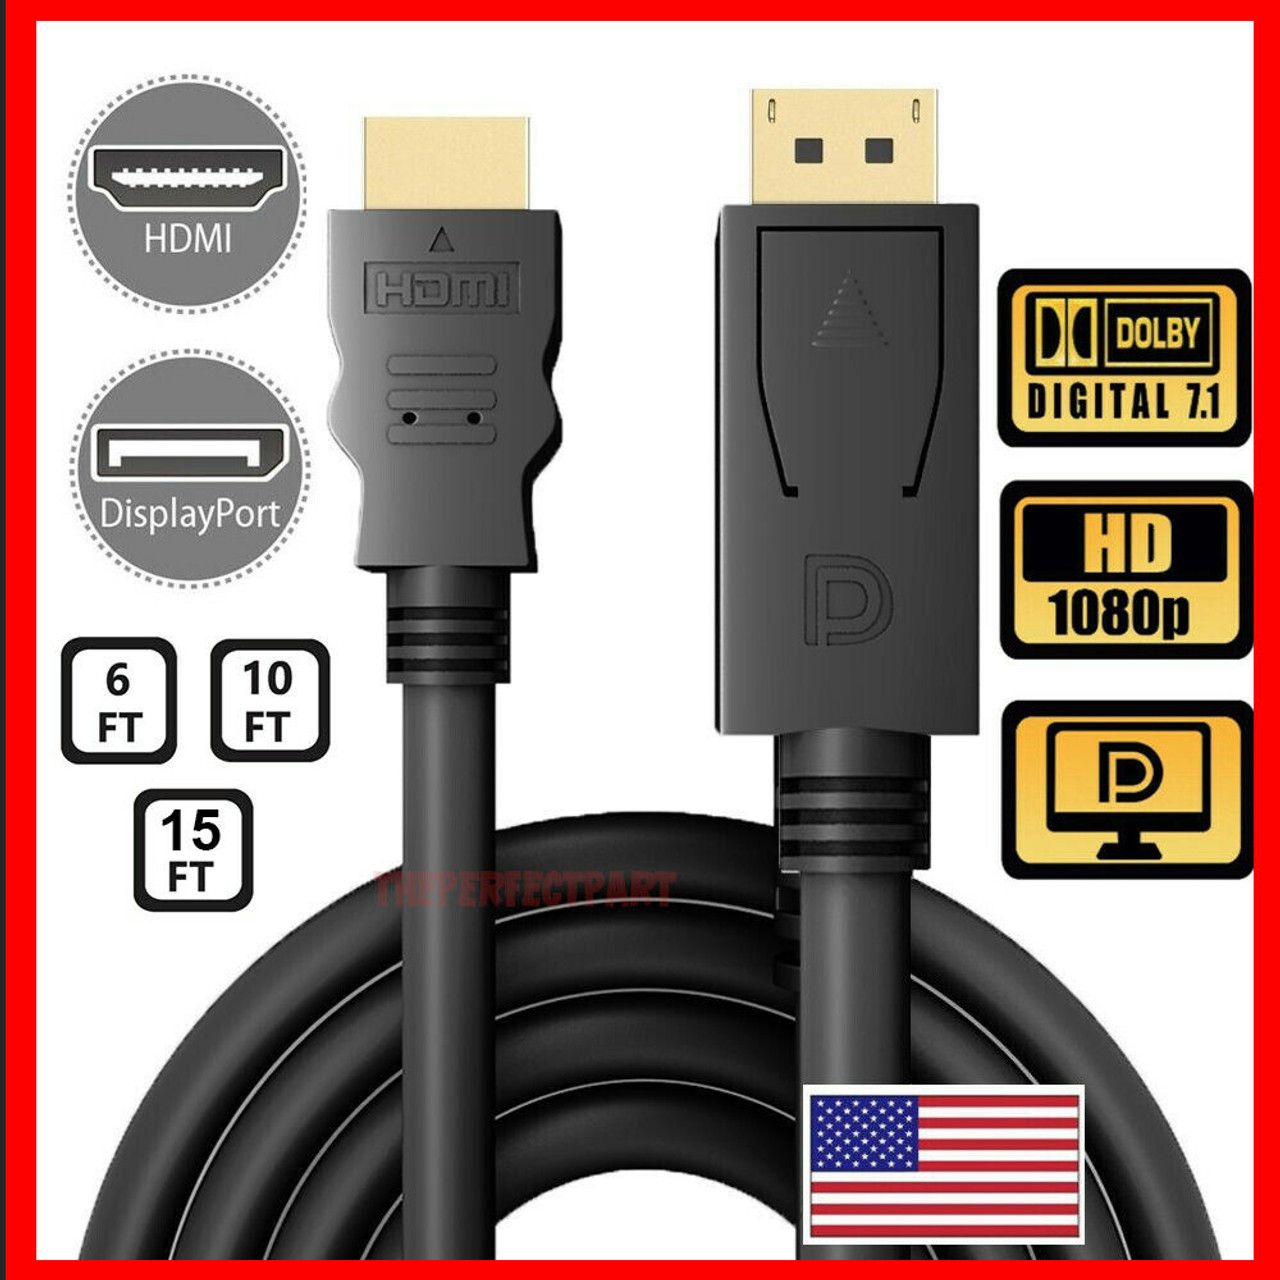 Display Port DP to HDMI Cable Adapter Converter Audio Video PC HDTV 1080P 60Hz